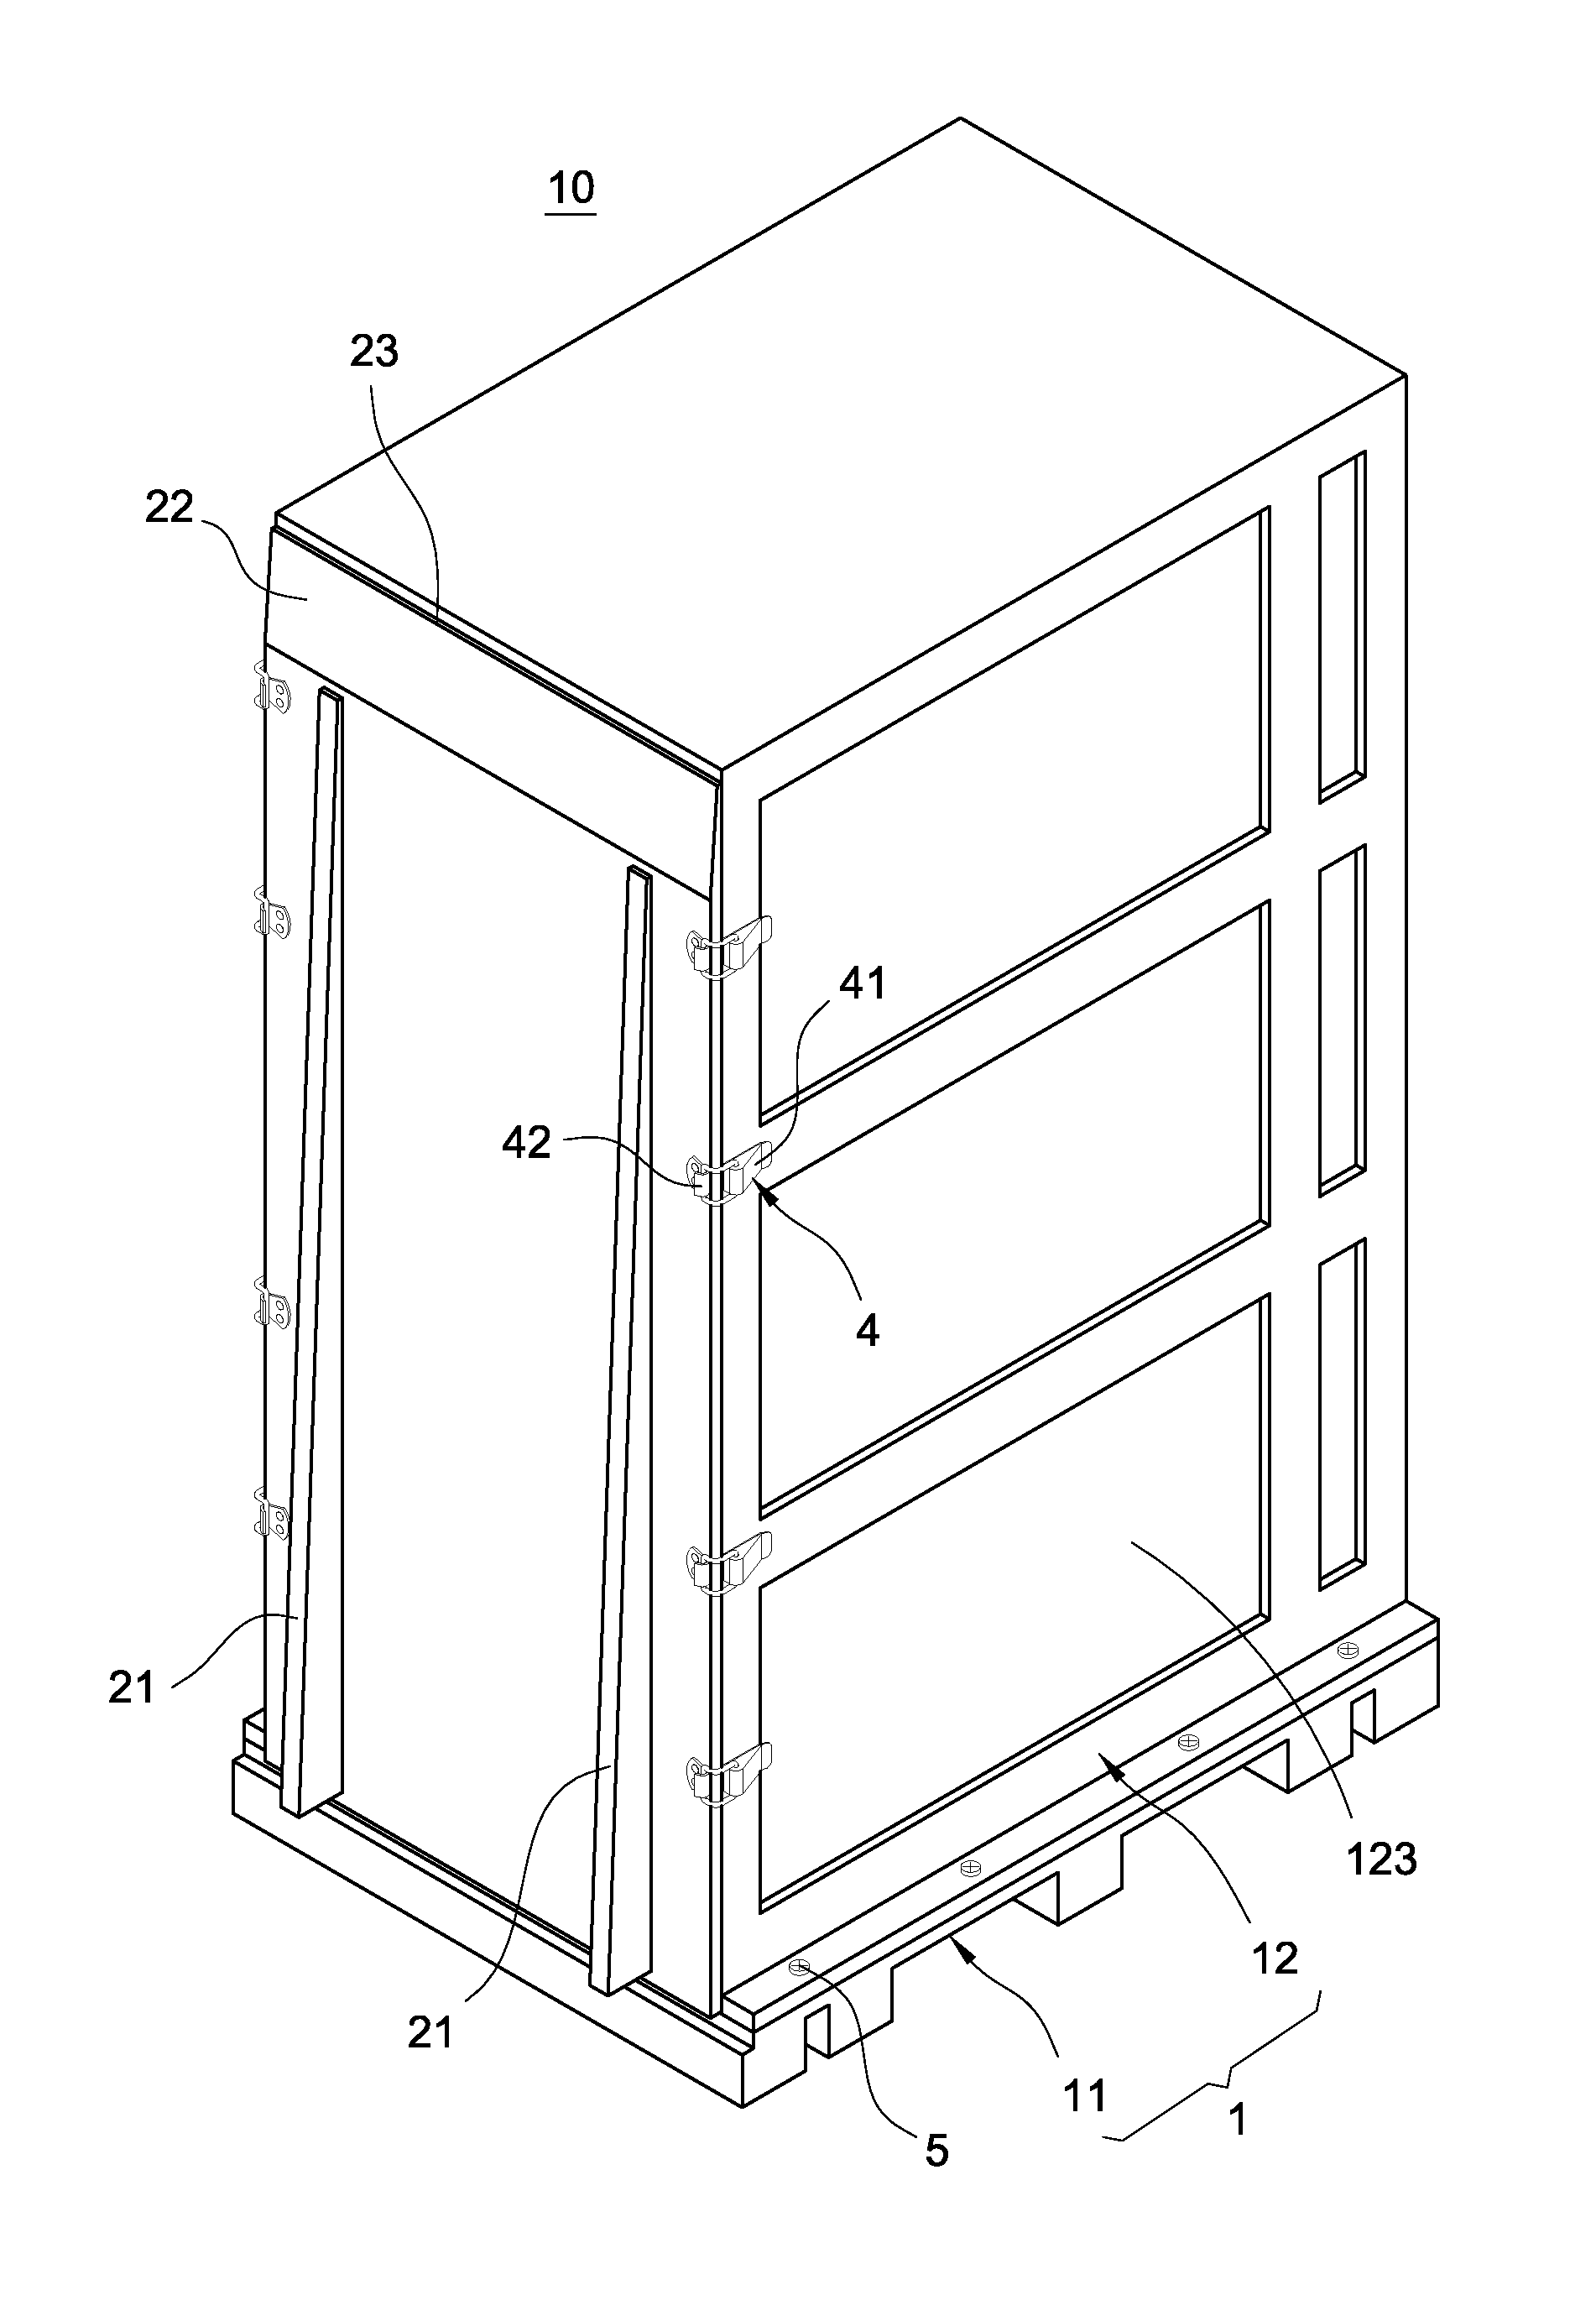 Modular protective housing structure